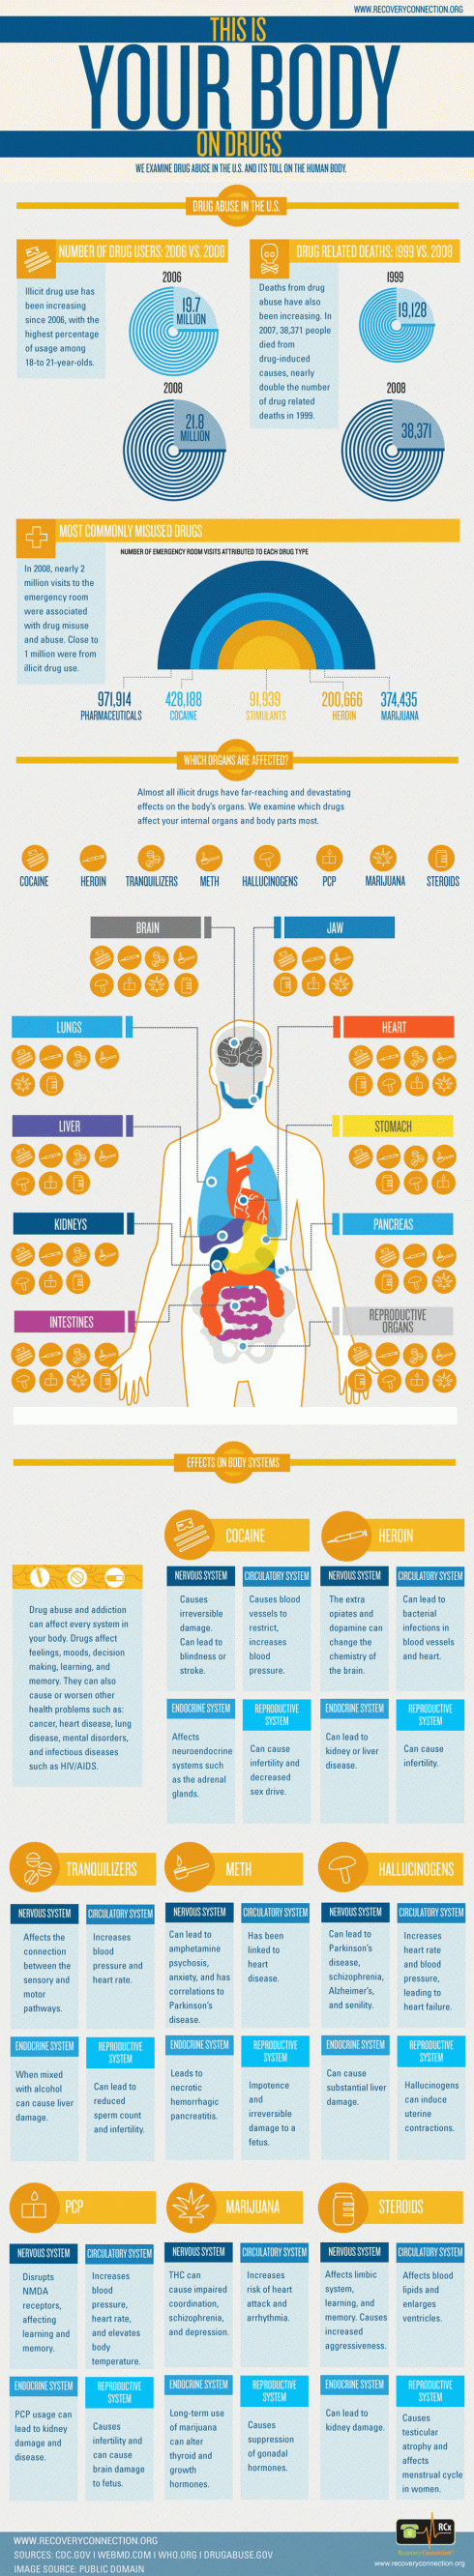 Drug Abuse and Your Body Exposed Infographic